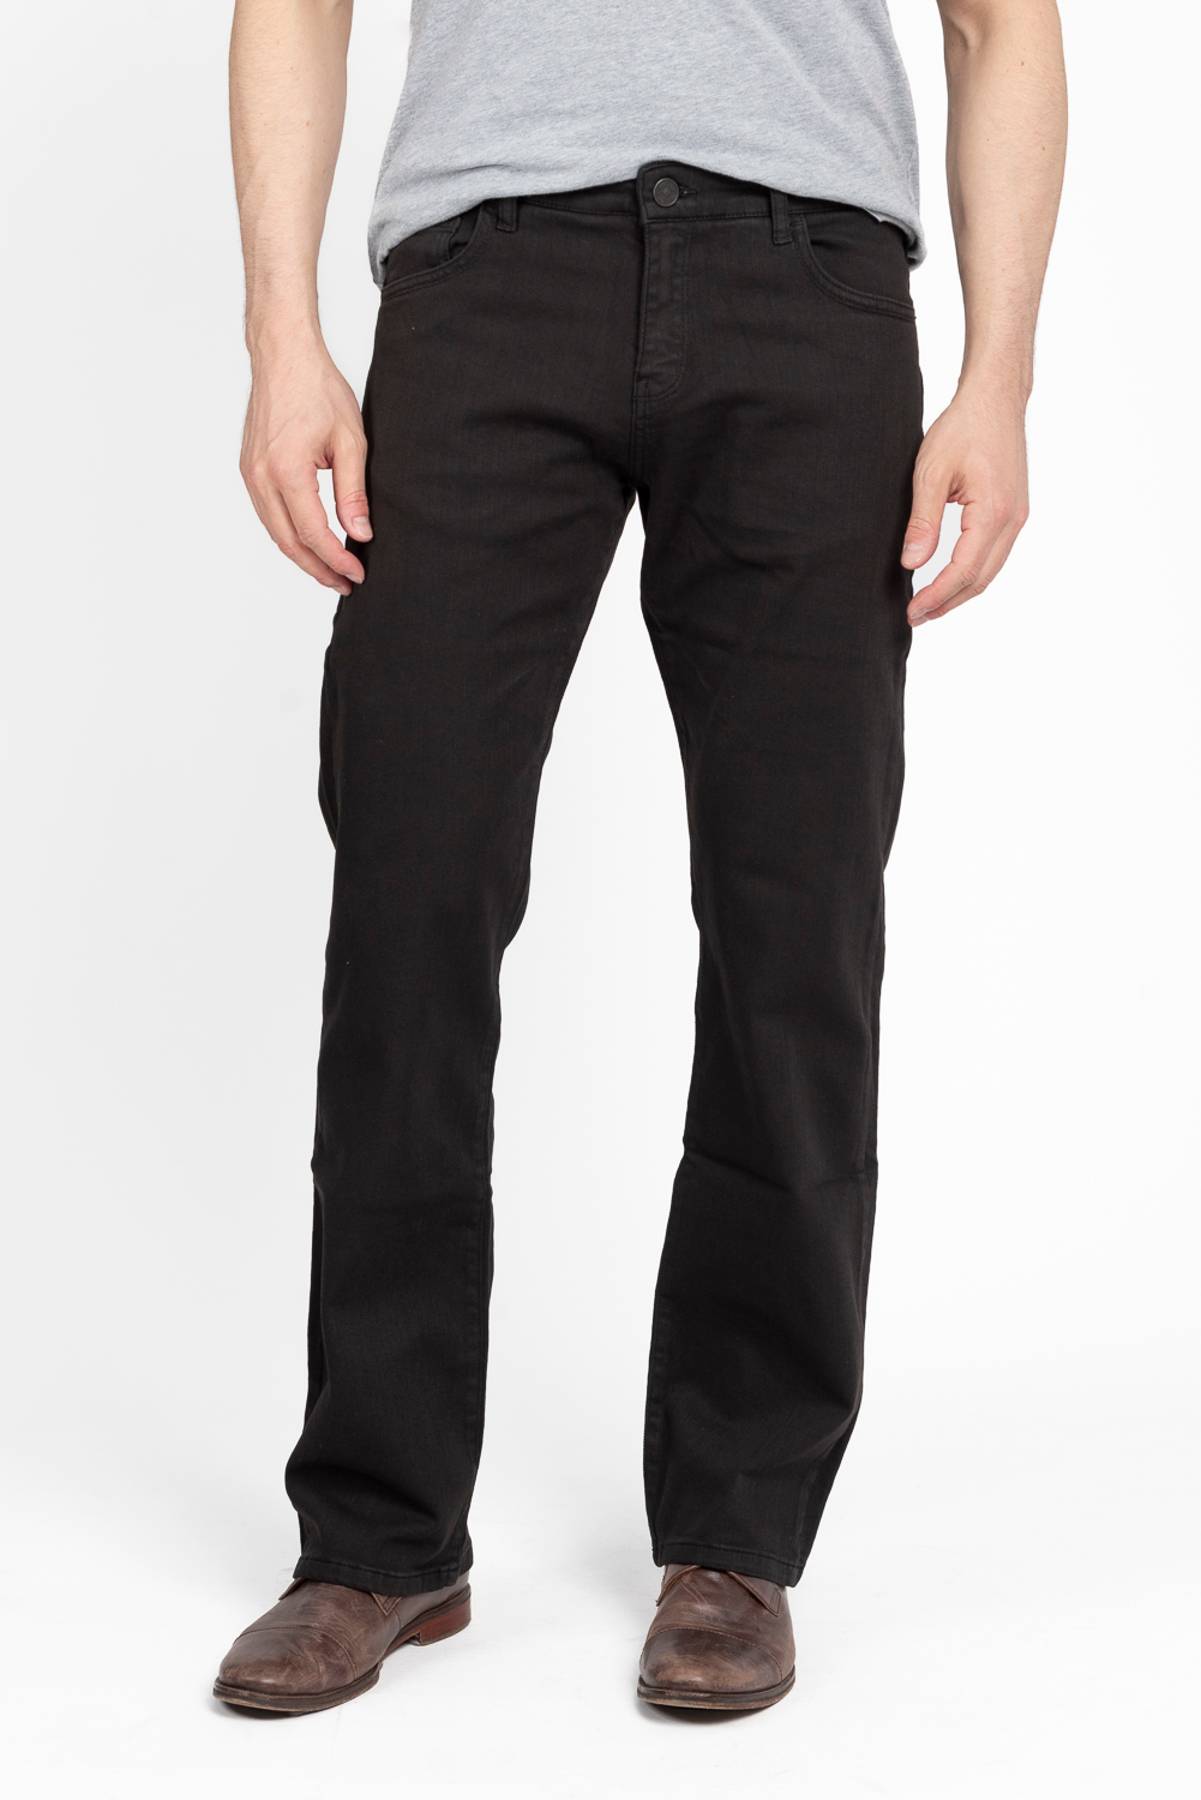 High Roller Fit Black Twill